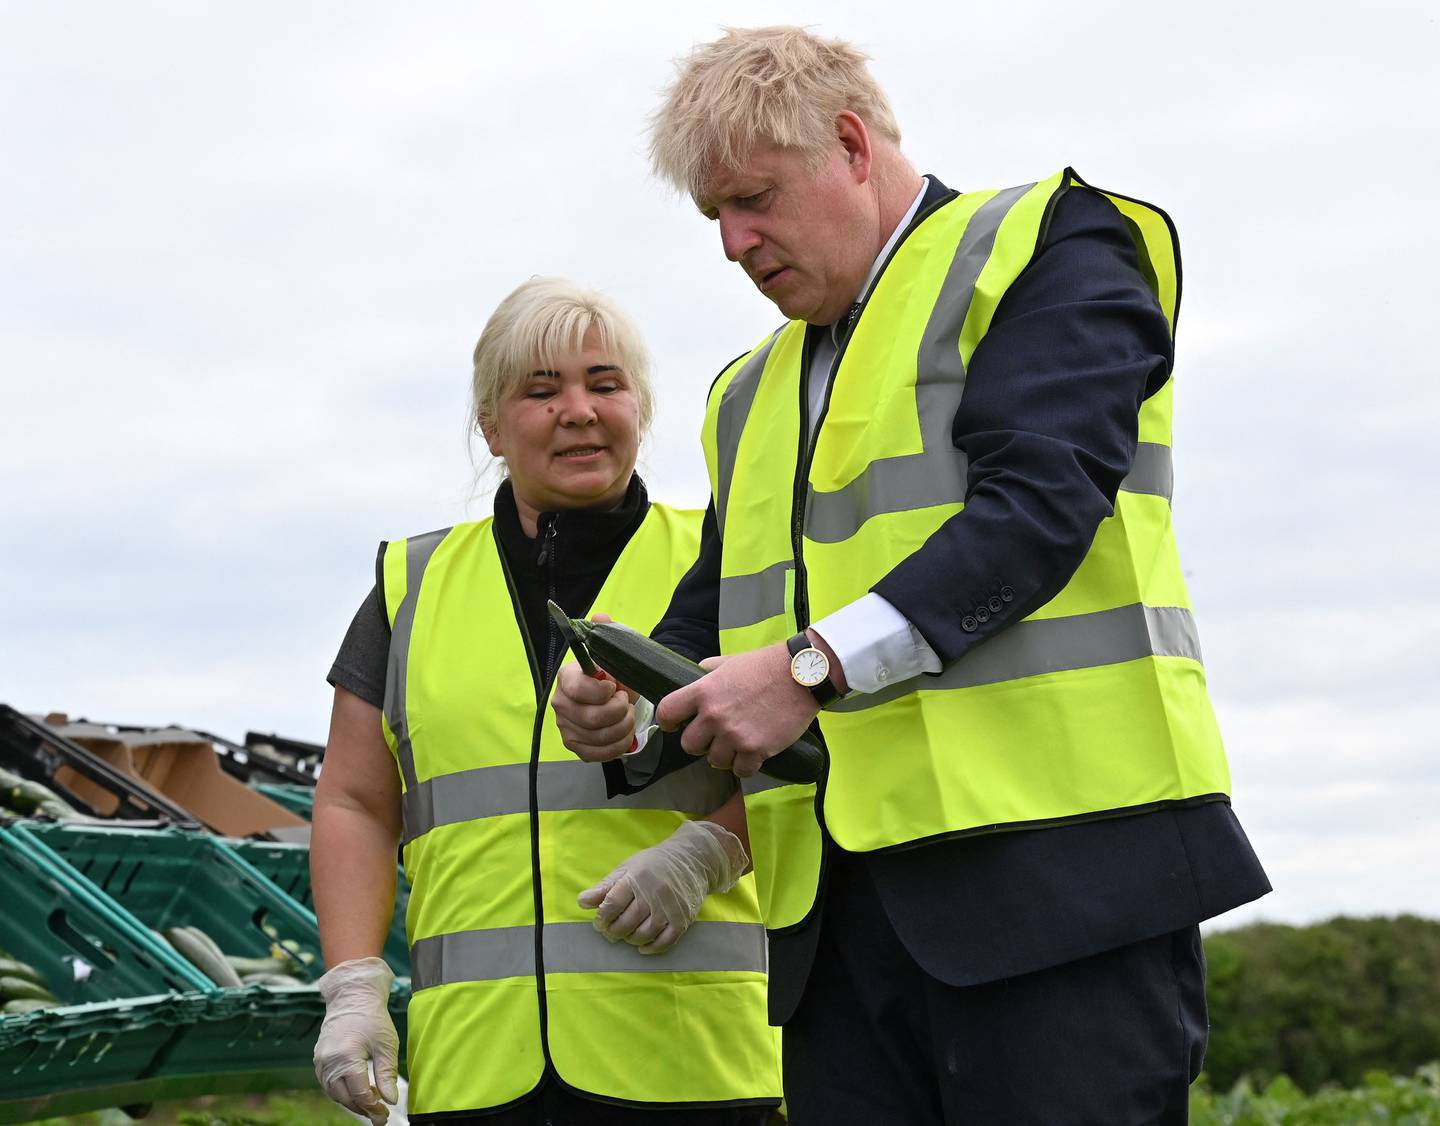 Britain's Prime Minister Boris Johnson is shown by a picker how to 'top' a courgette with a knife as he picks vegetables during a visit to Southern England Farms Ltd in Cornwall on Monday. AFP